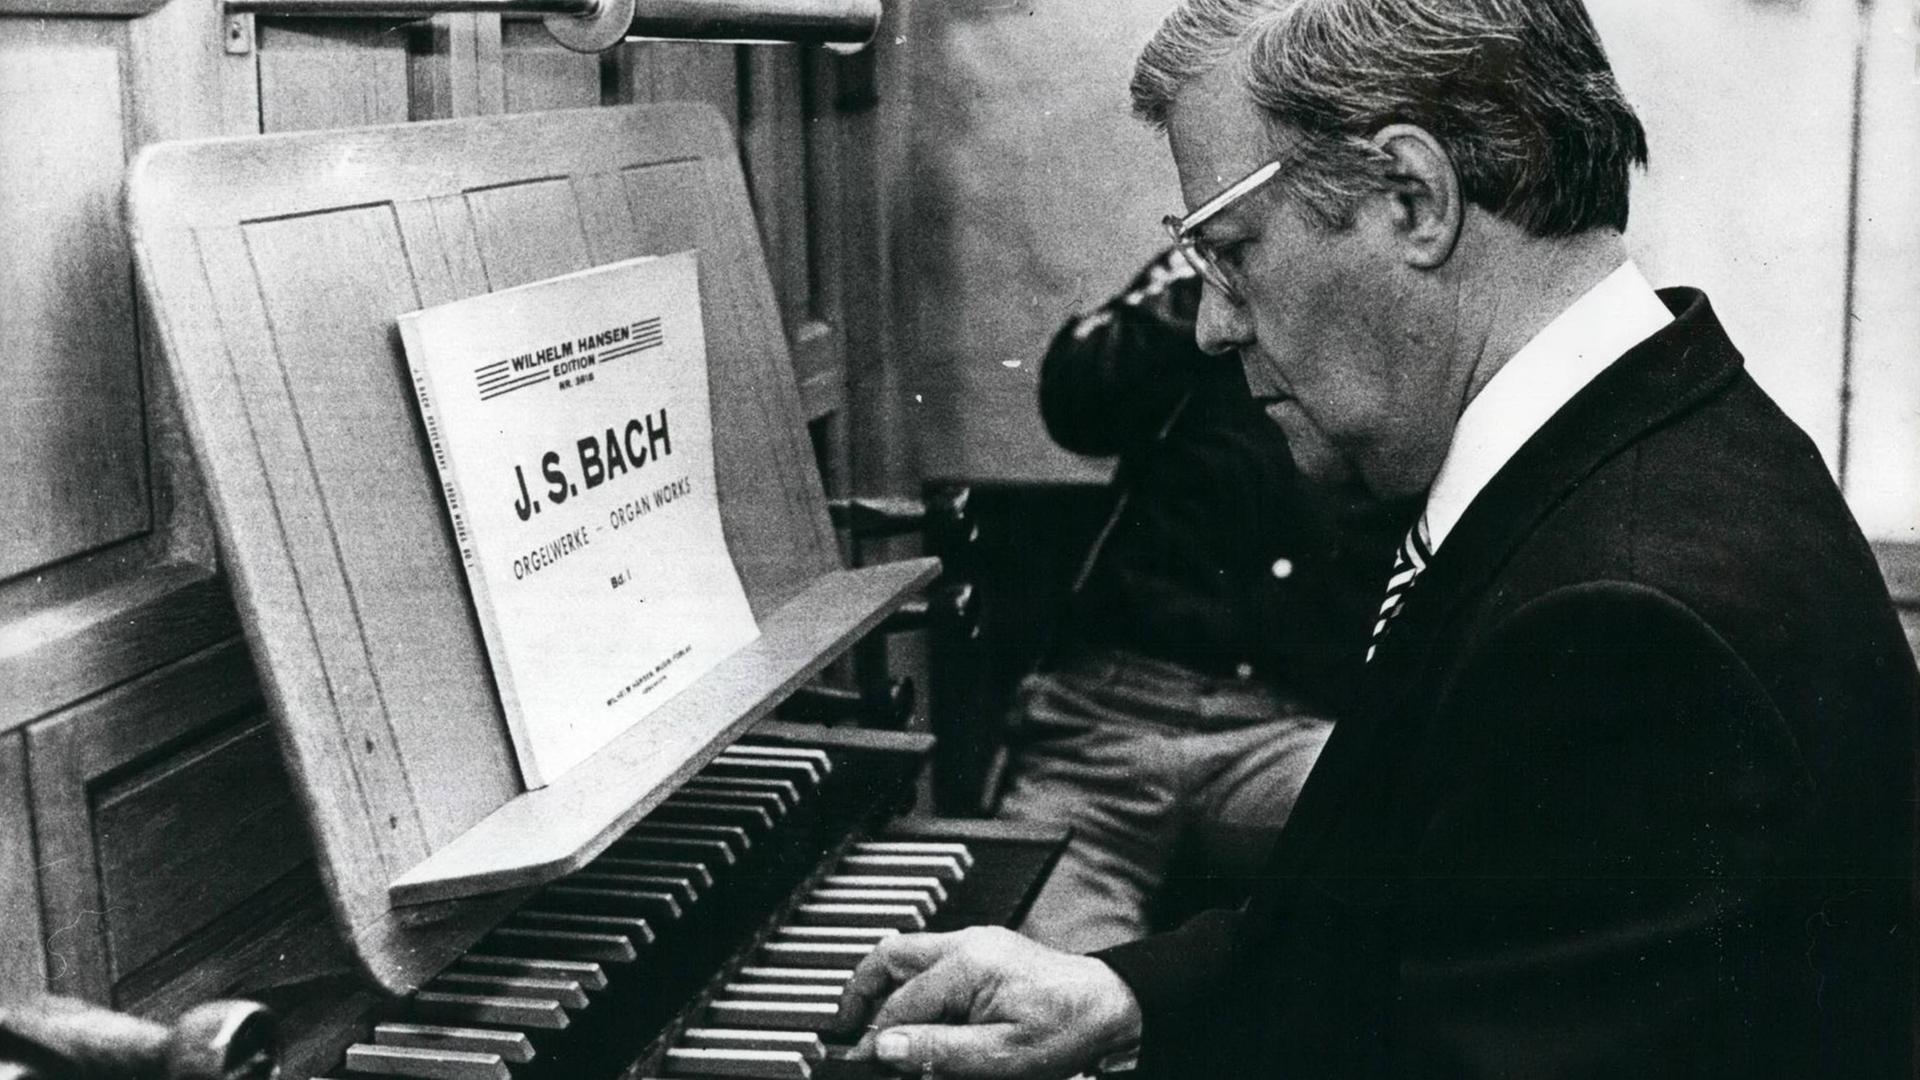 1980 - Helmut is Bach: Evidently Helmet Schmidt, prefers Bach to Strauss, Schmidt recently received the confidence of his compatriots to continue as Prime Minister of Germany. Photo shows Here he is playing the organ in a Danish church during recent visit to Denmark |